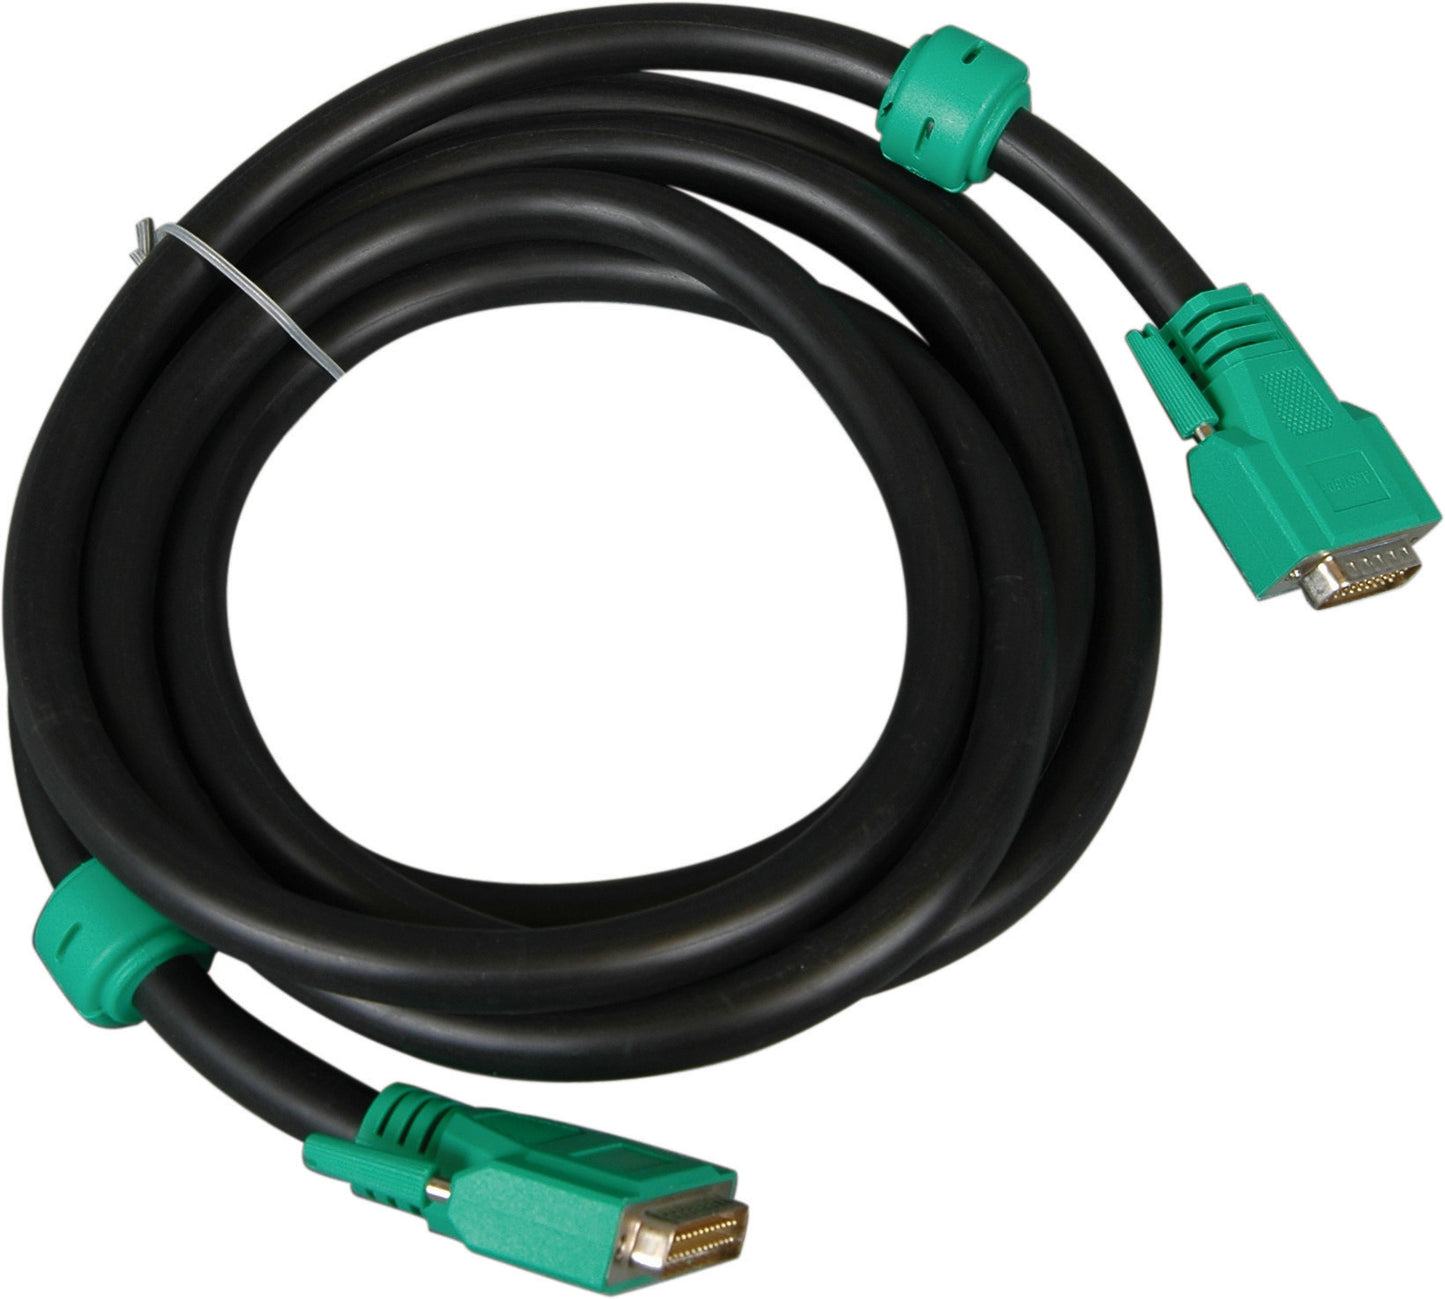 Lynx CBL-AES1605 HD26 to D25 Cable 12 FT